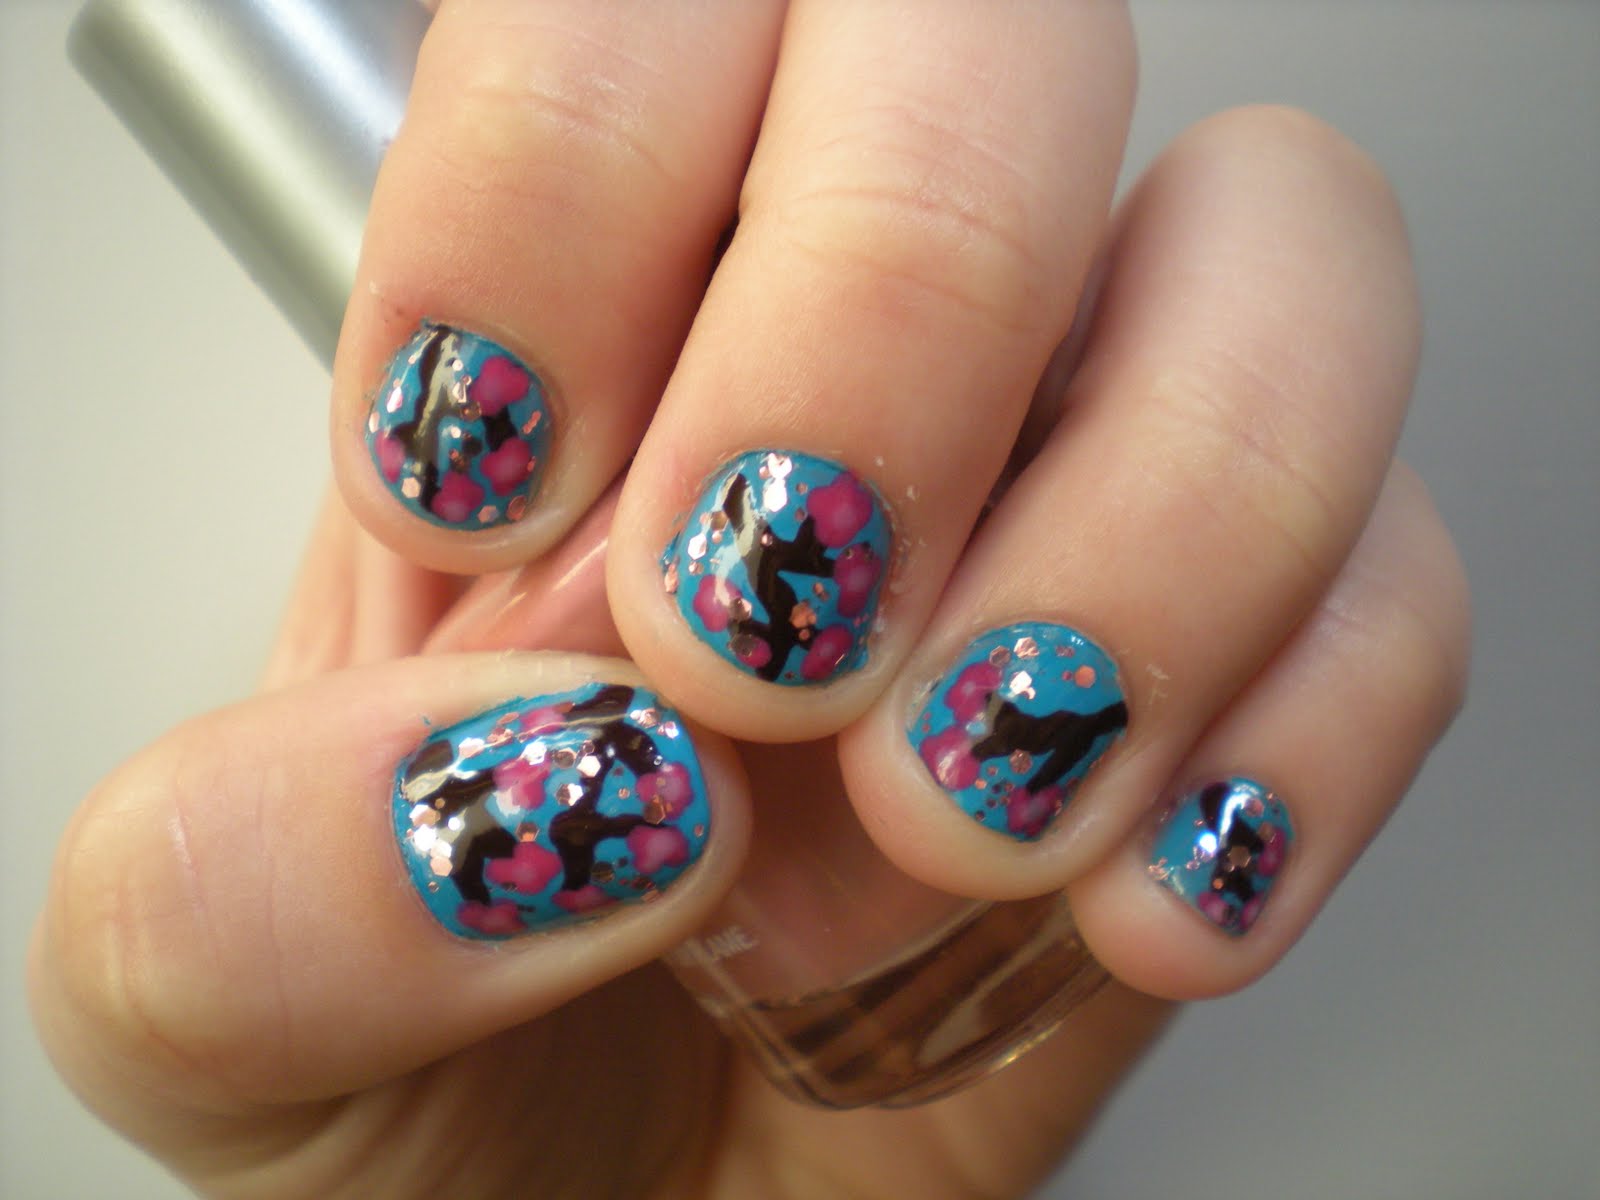 4. Fun and Easy Nail Designs to Try at Home - wide 9